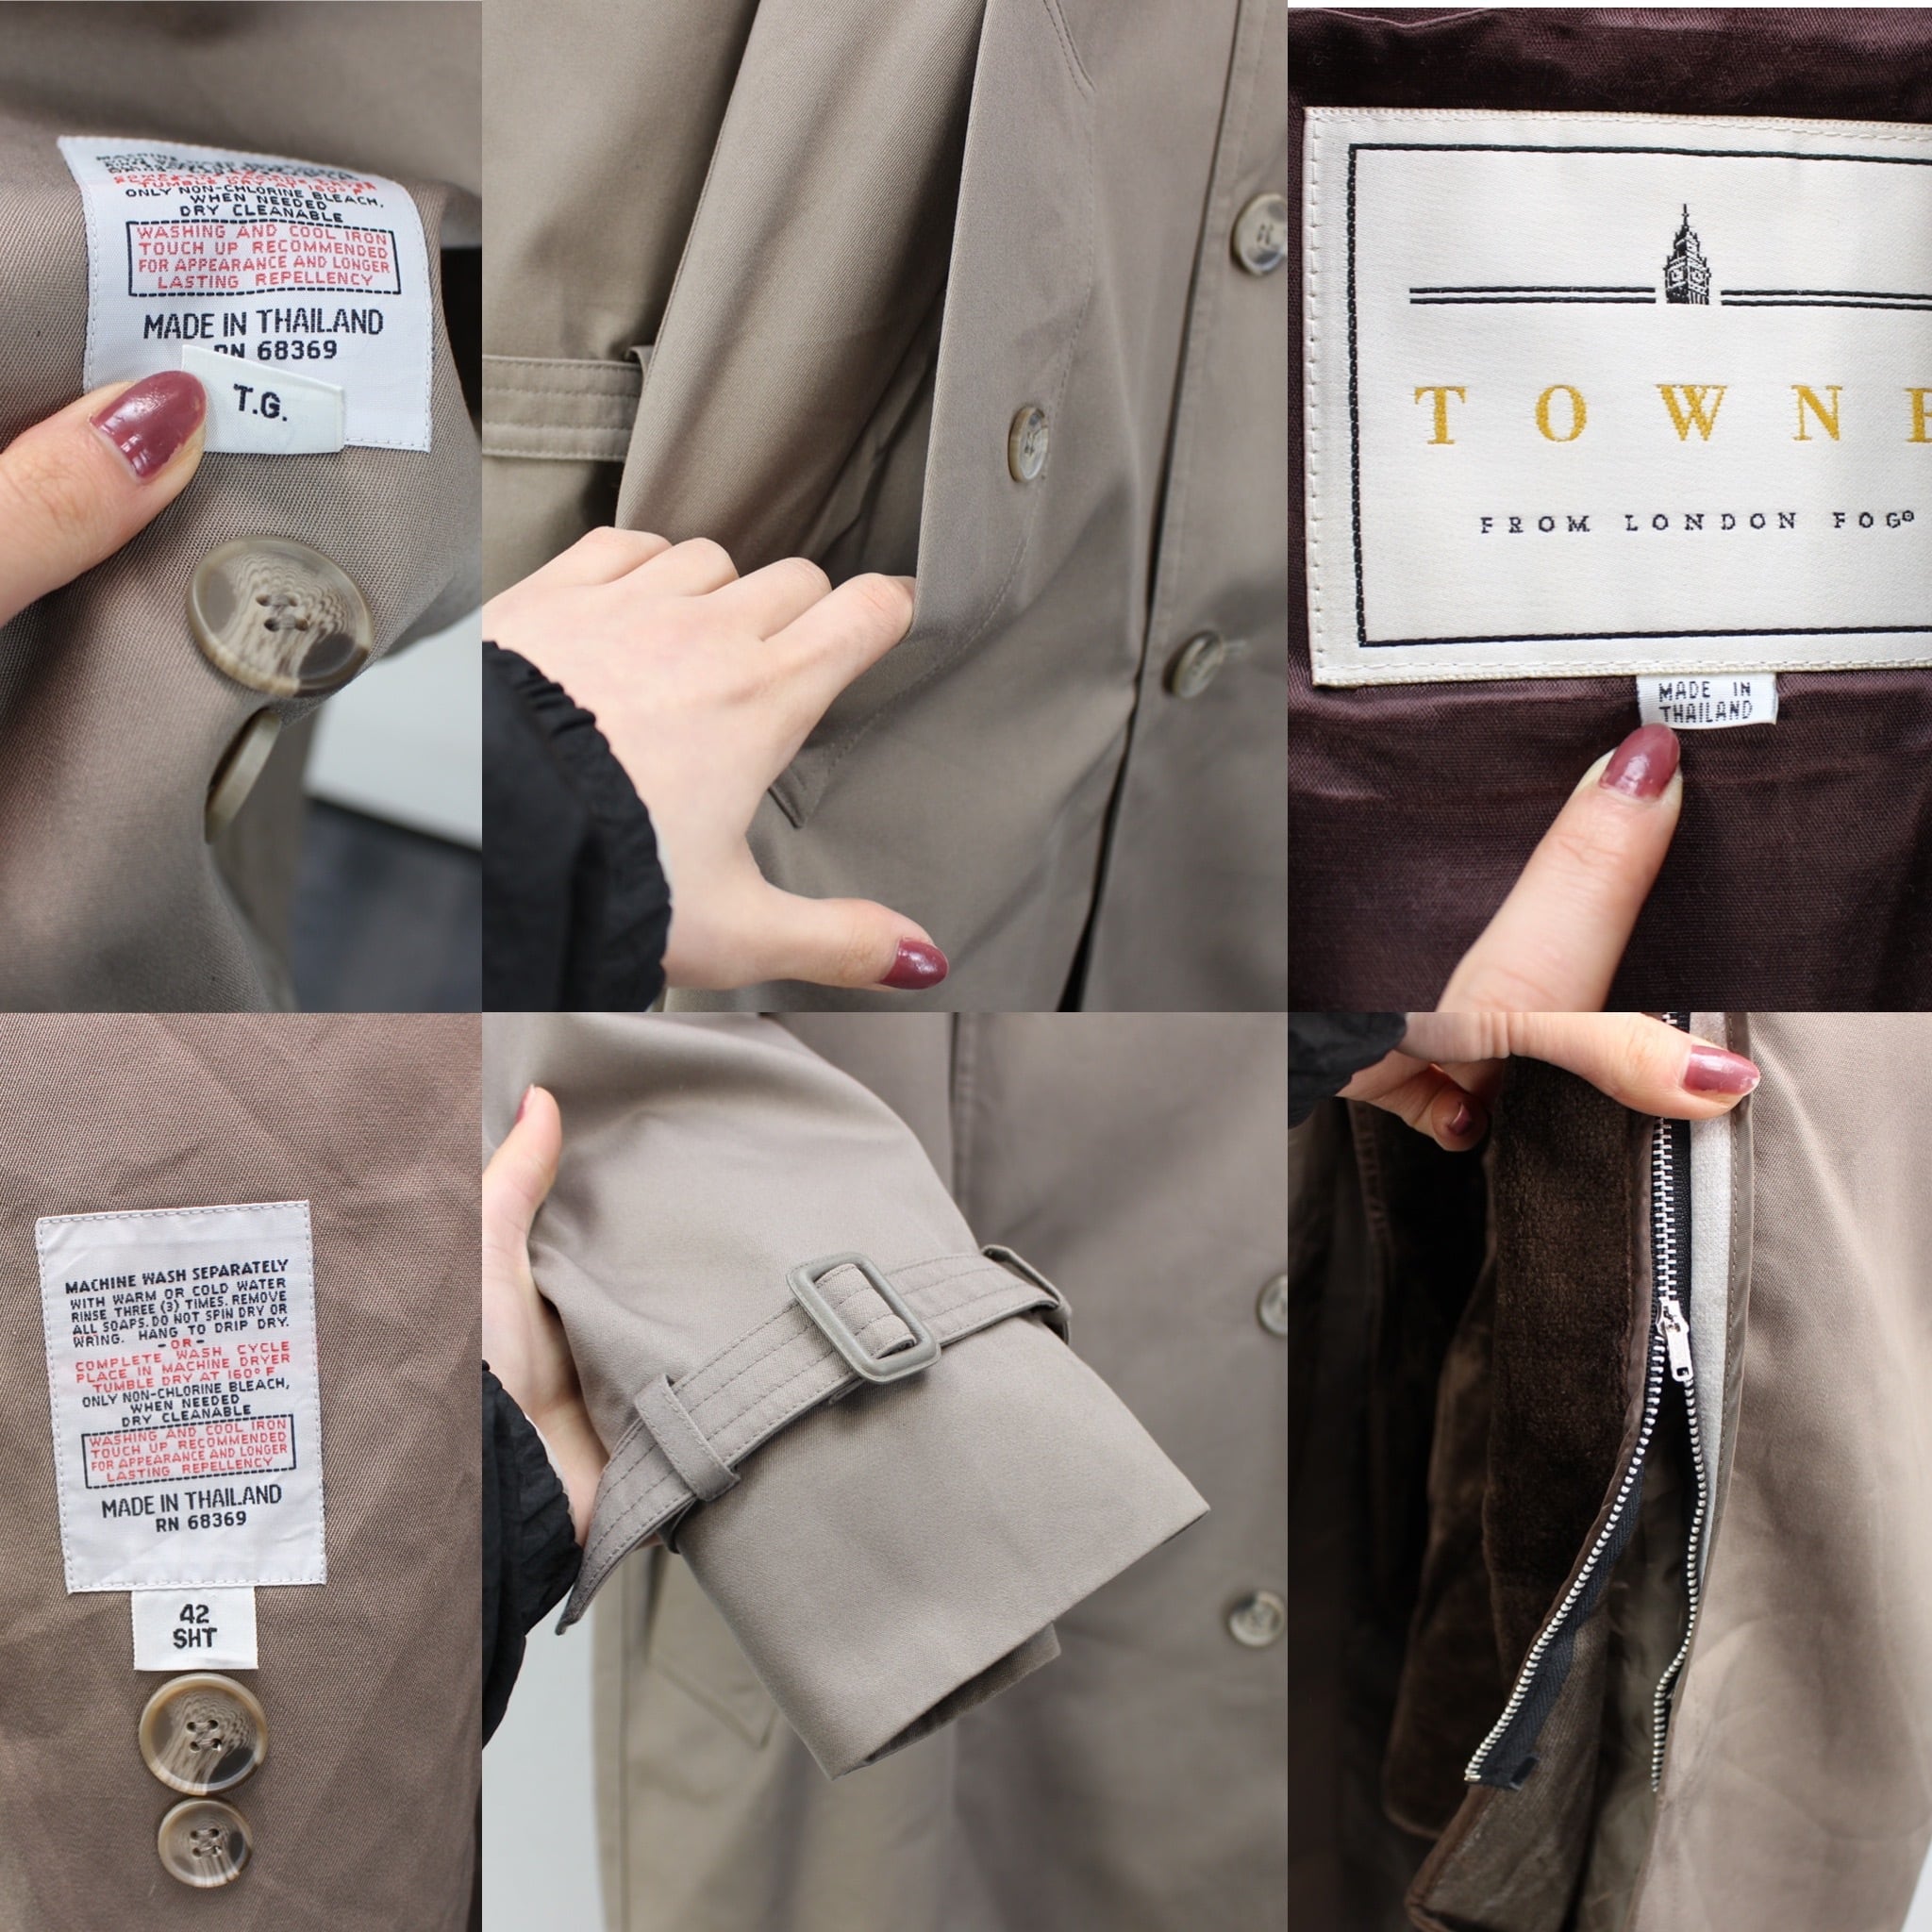 USA VINTAGE TOWNE BY LONDON FOG TRENCH COAT WITH LINER/アメリカ ...